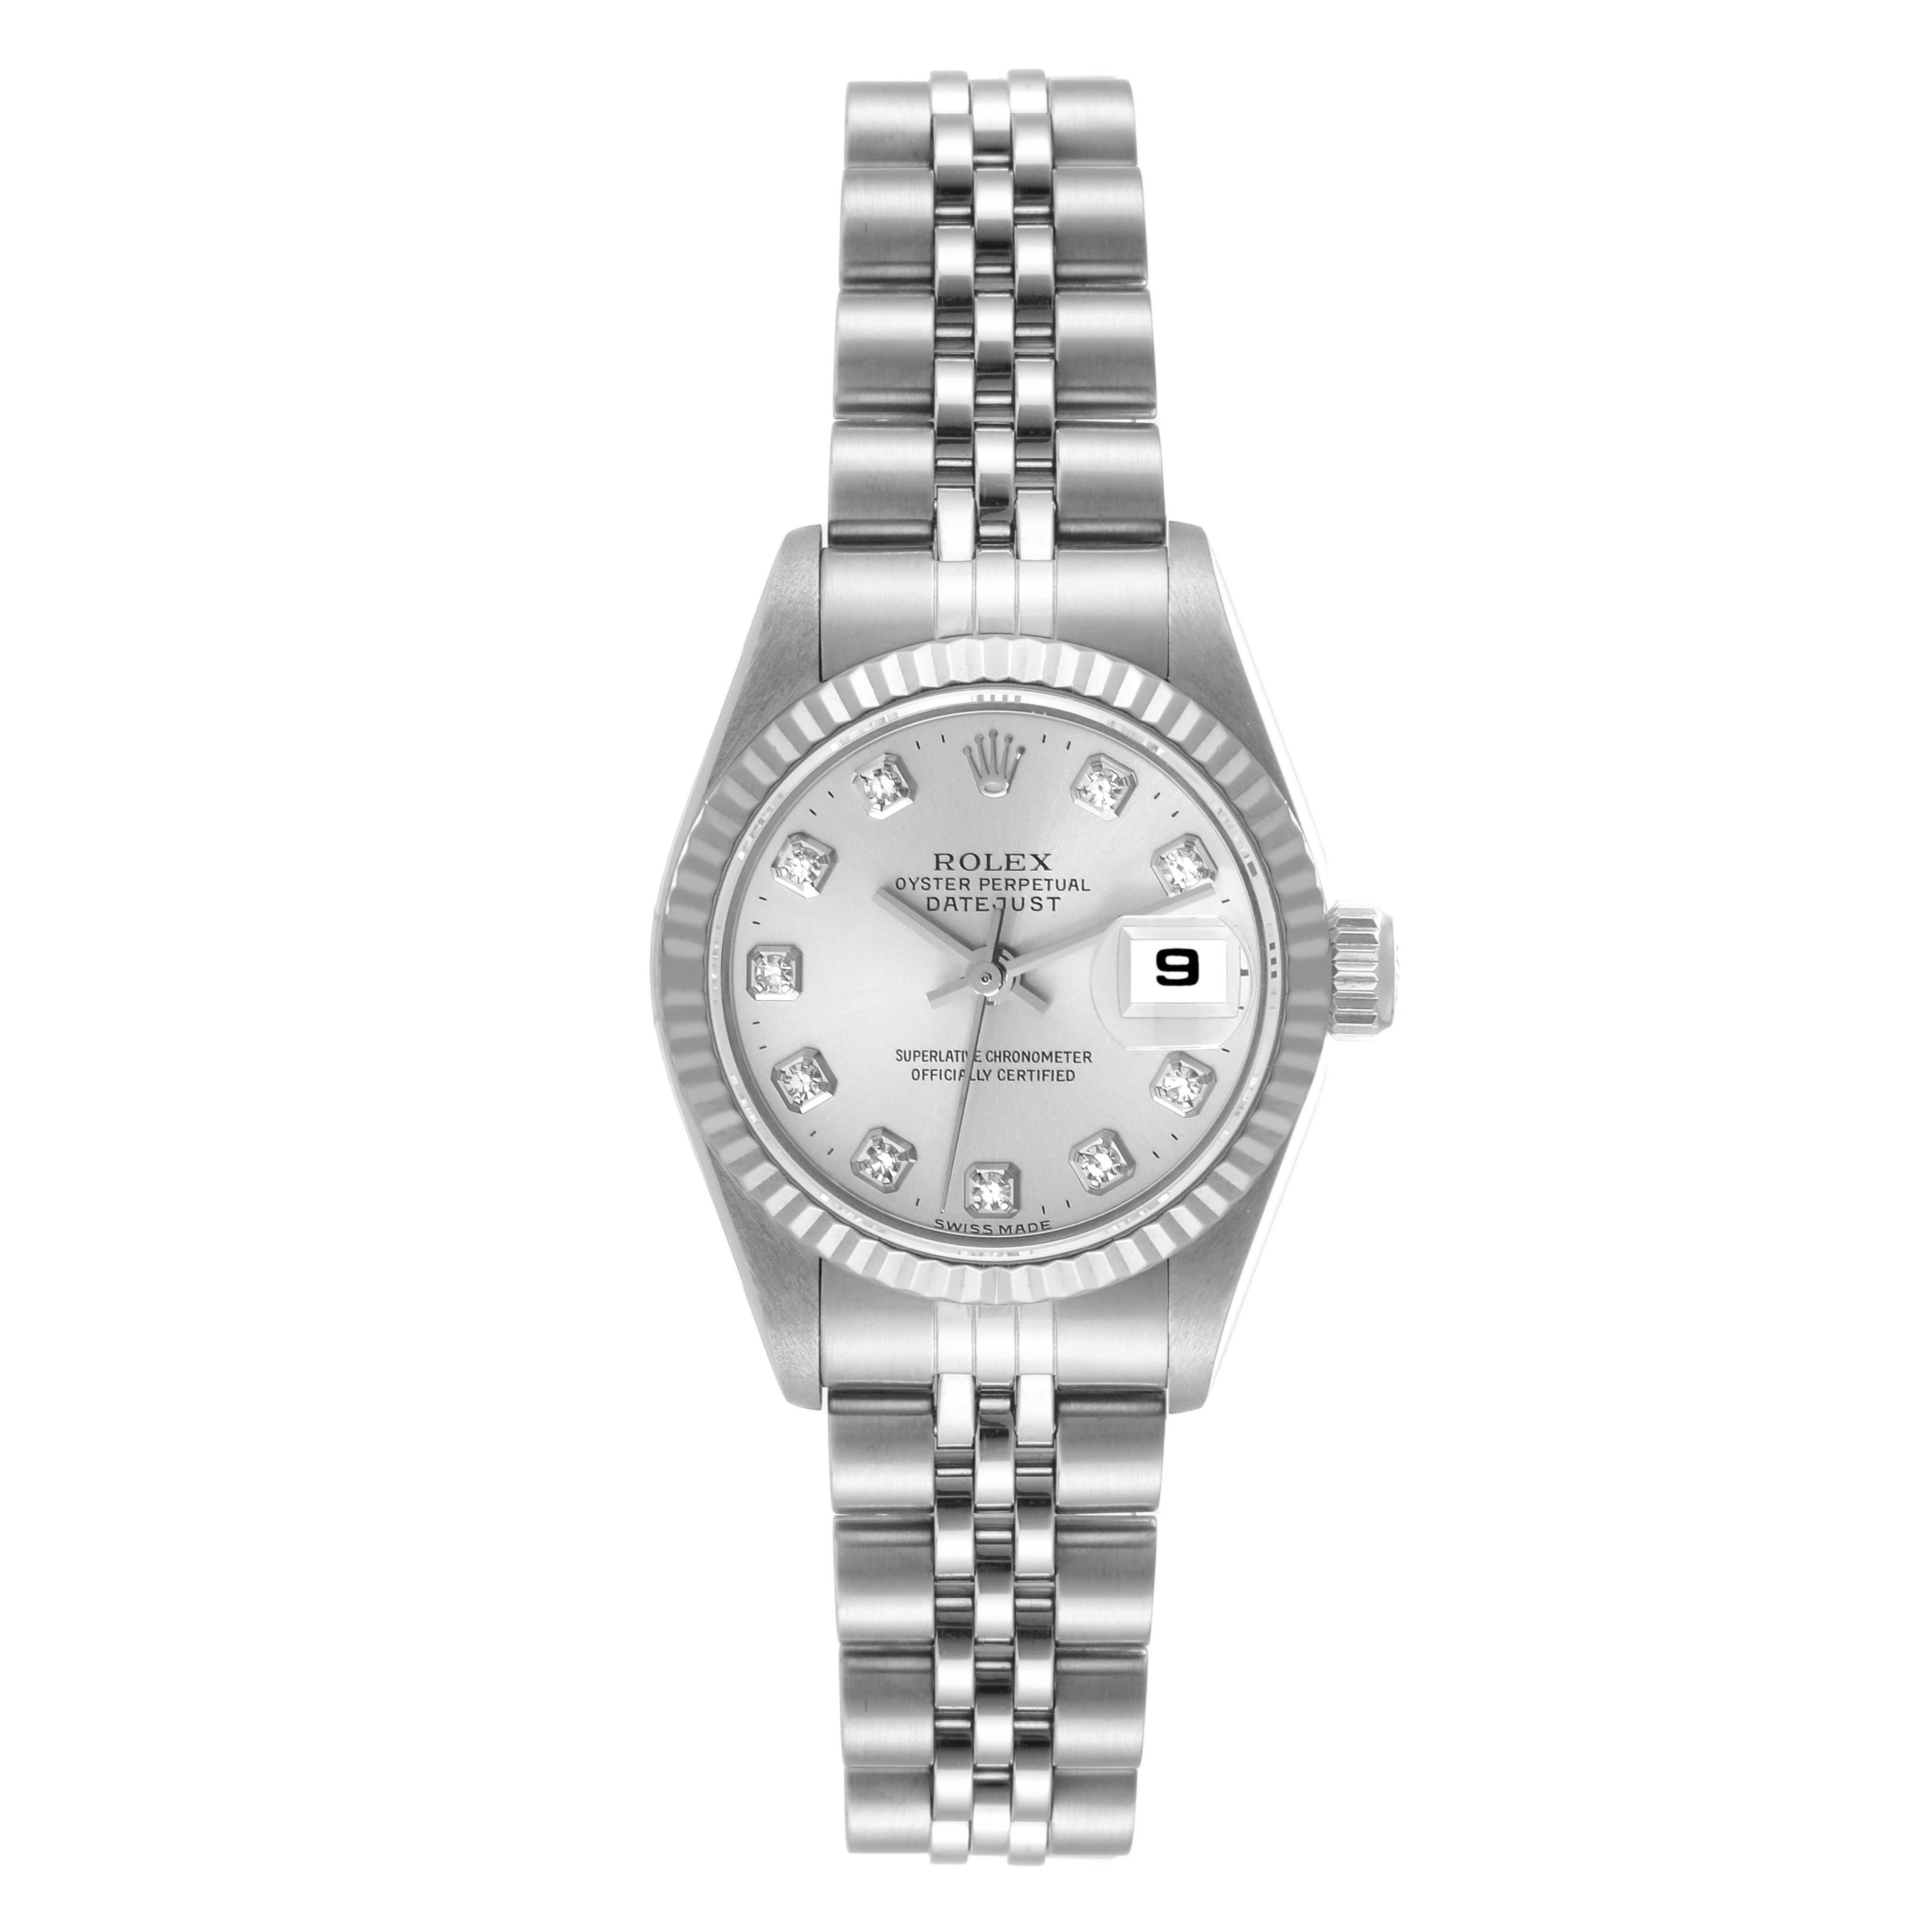 Rolex Datejust Steel White Gold Silver Diamond Dial Ladies Watch 69174. Officially certified chronometer self-winding movement. Stainless steel oyster case 26.0 mm in diameter. Rolex logo on a crown. 18k white gold fluted bezel. Scratch resistant